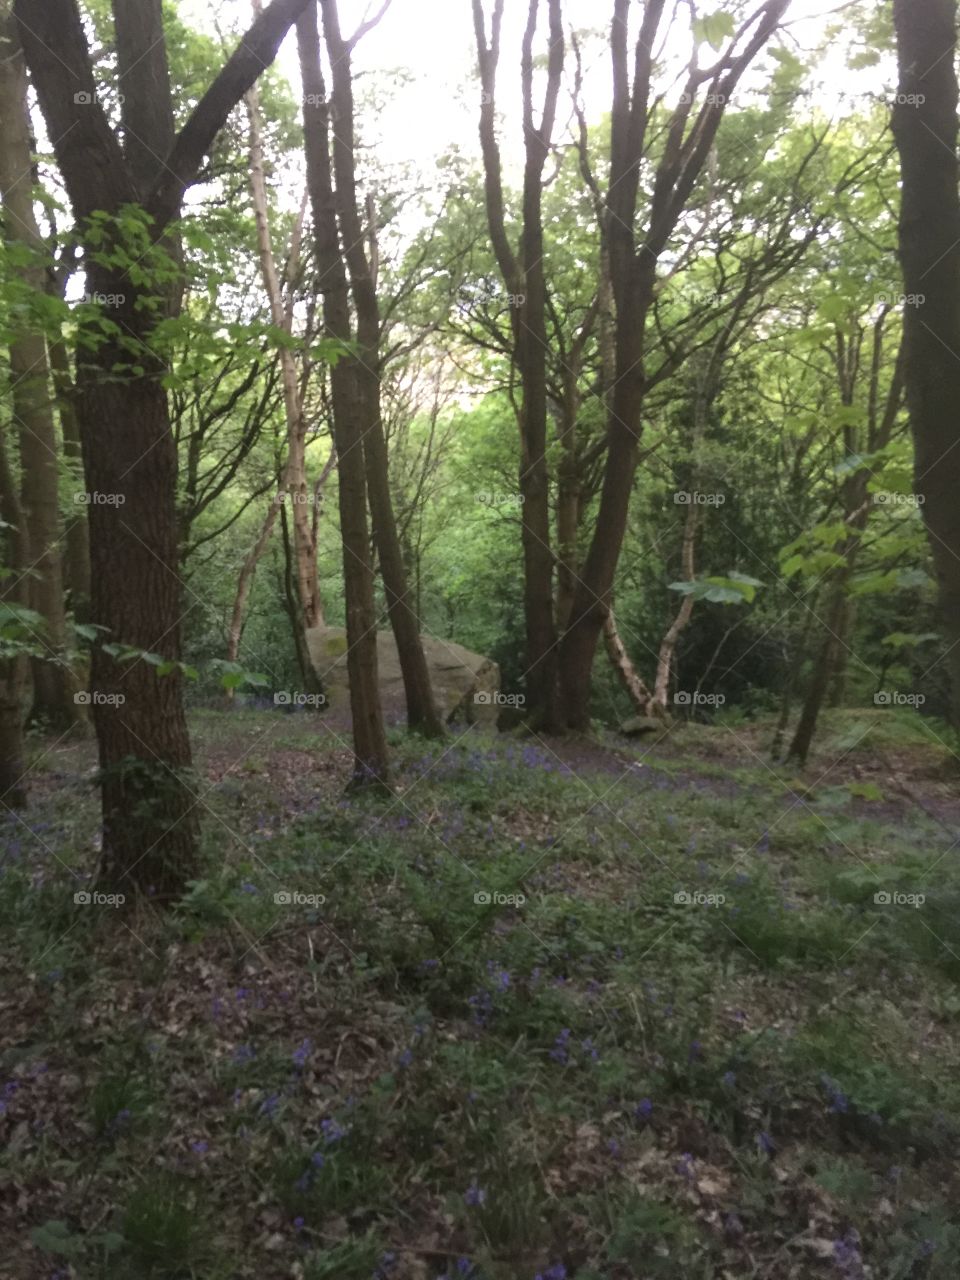 In the woods , Summer in England 